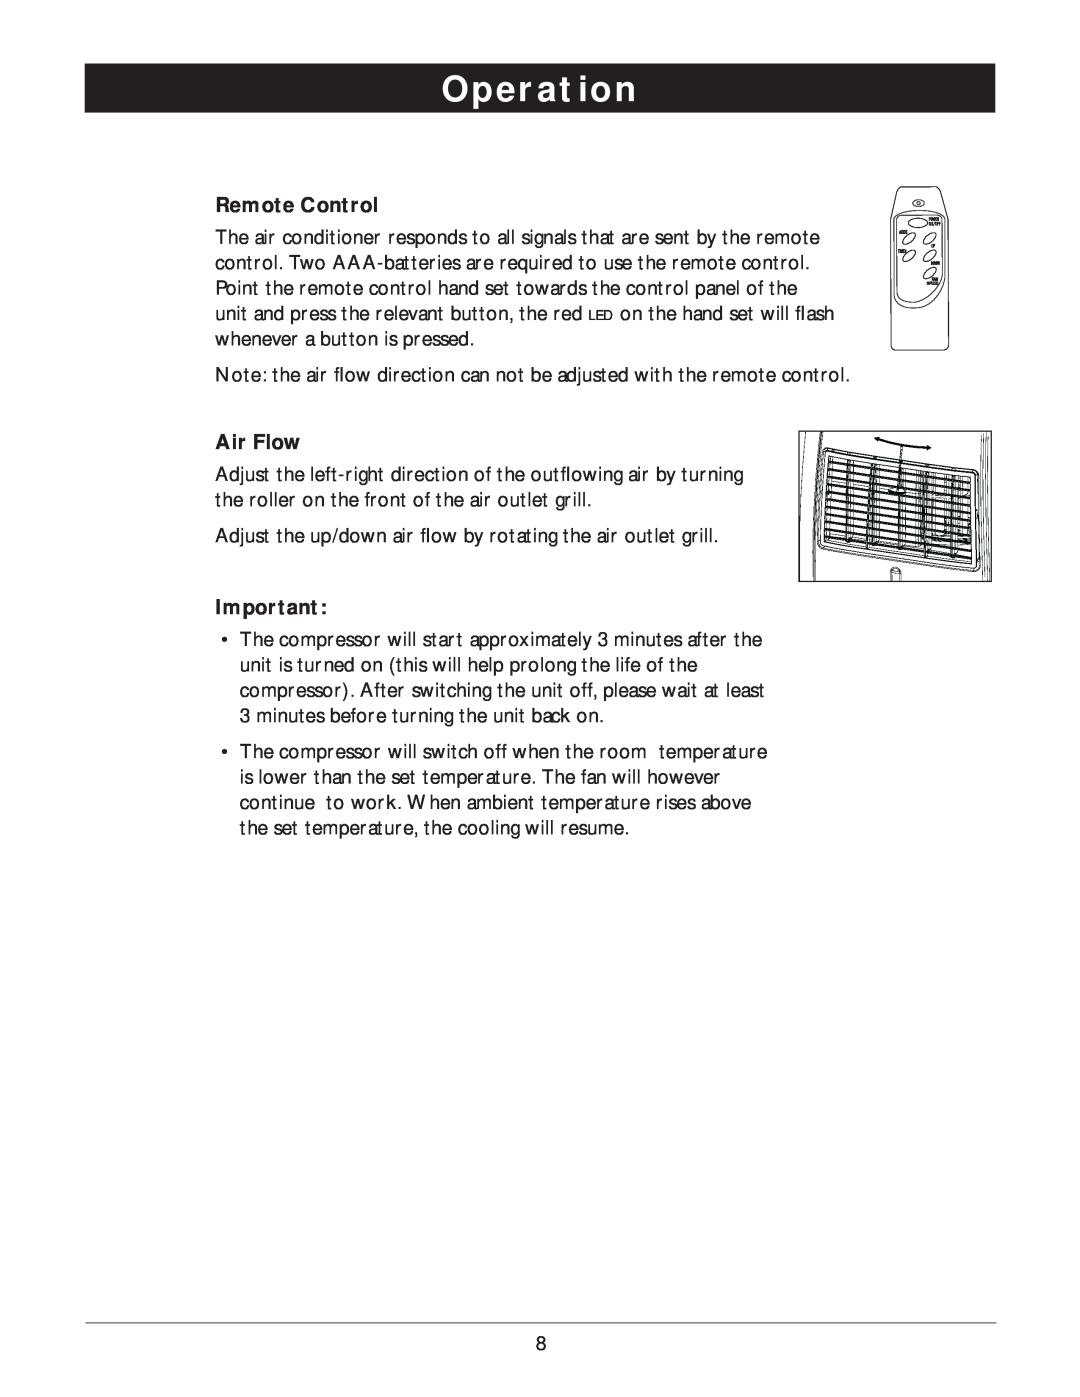 Amcor PORTABLE AIRCONDITIONER owner manual Operation, Remote Control, Air Flow 